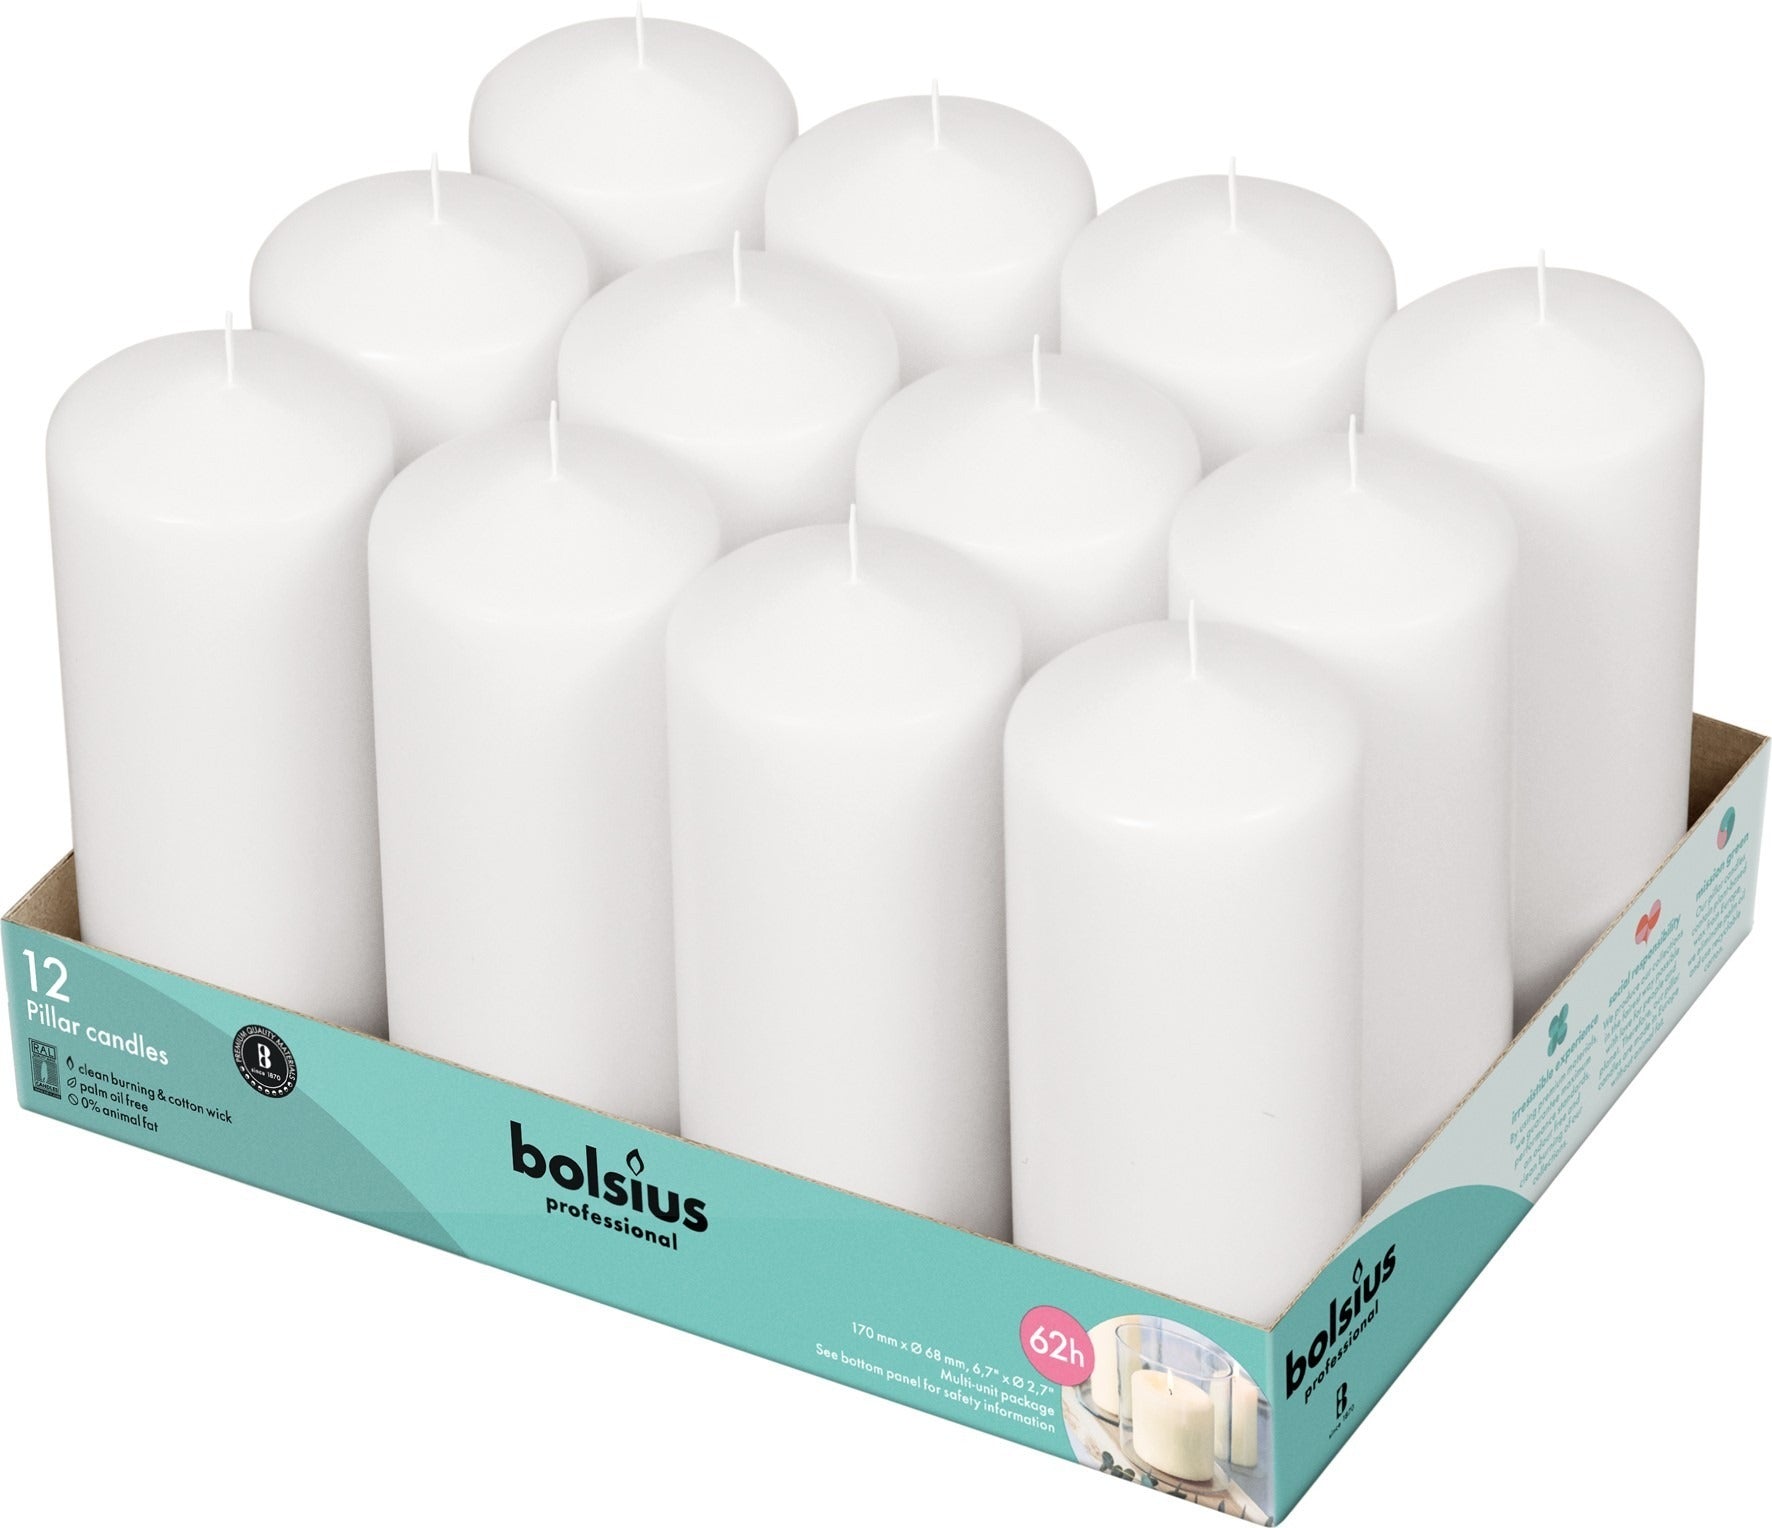 View 12 Bolsius Professional Pillar Candles White 16868mm information